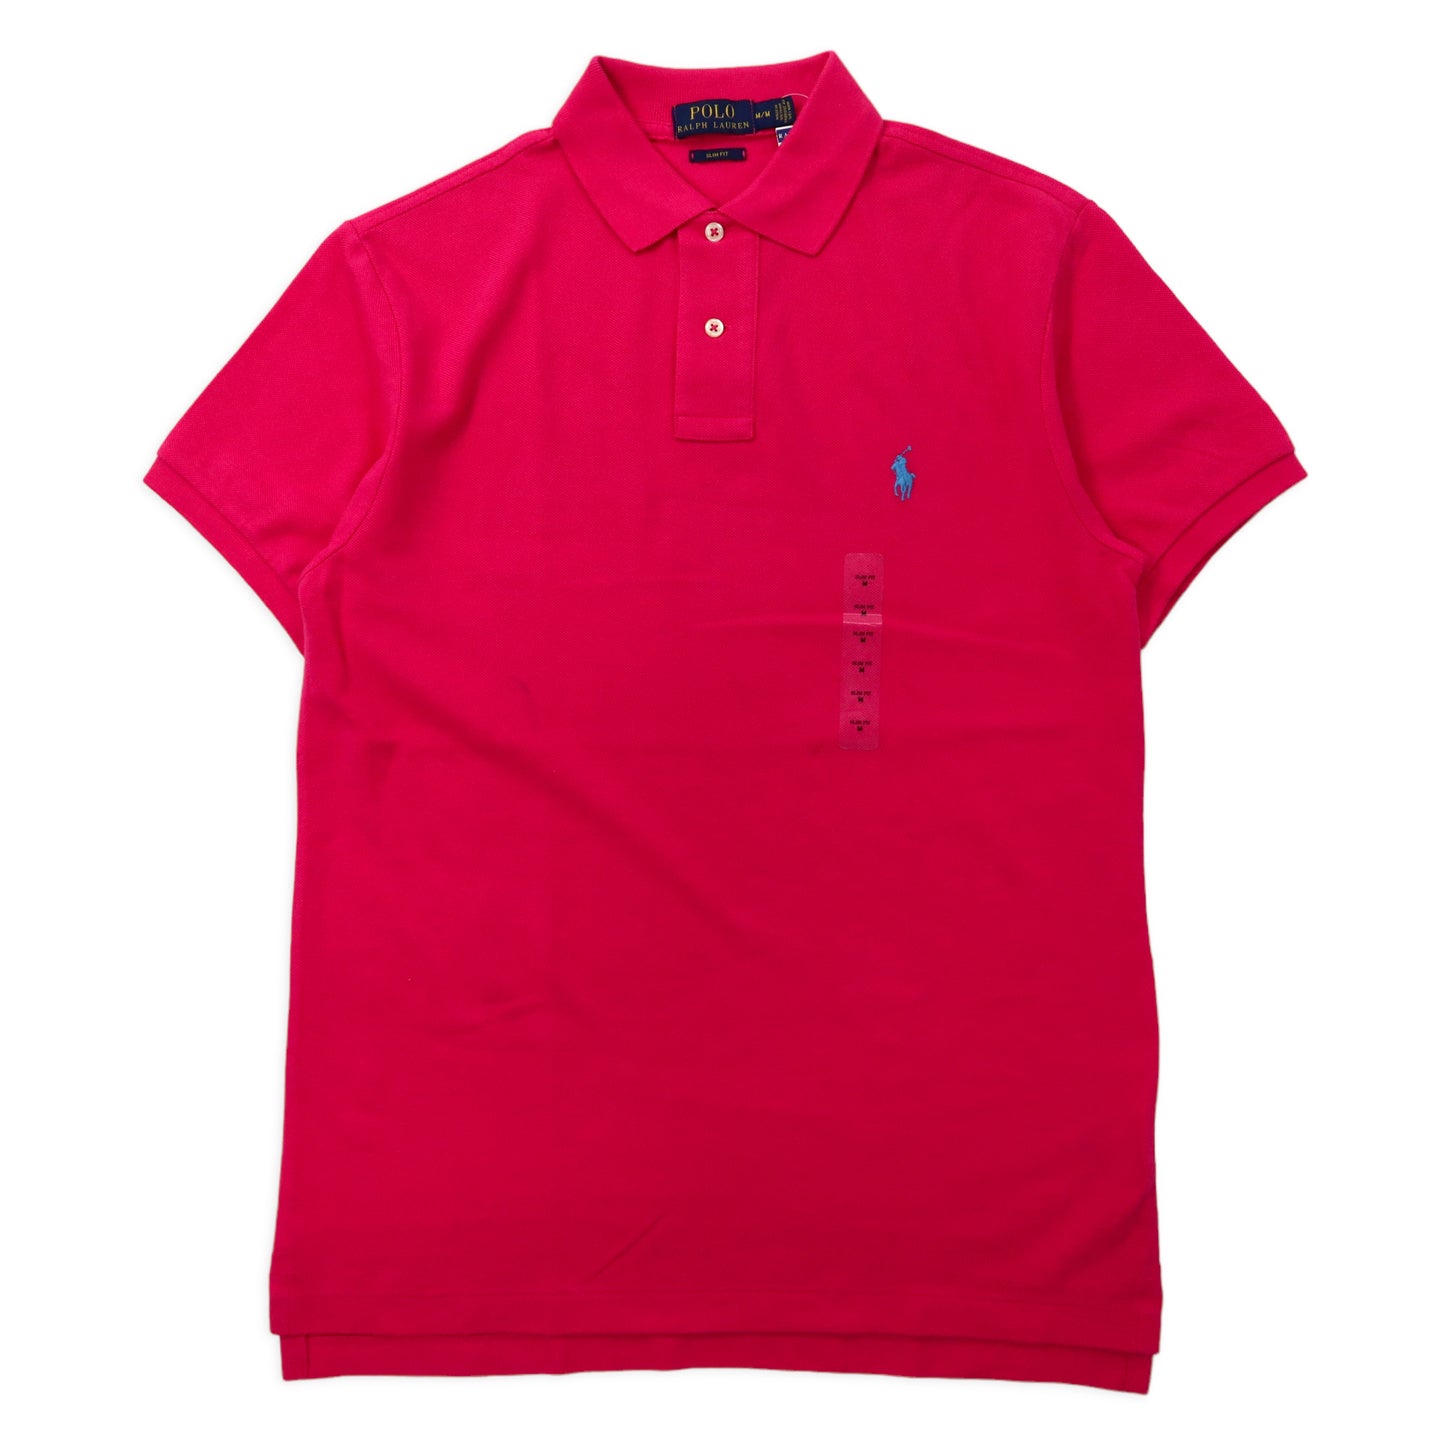 POLO RALPH LAUREN Polo Shirt M Pink Cotton Slim Fit Small Pony